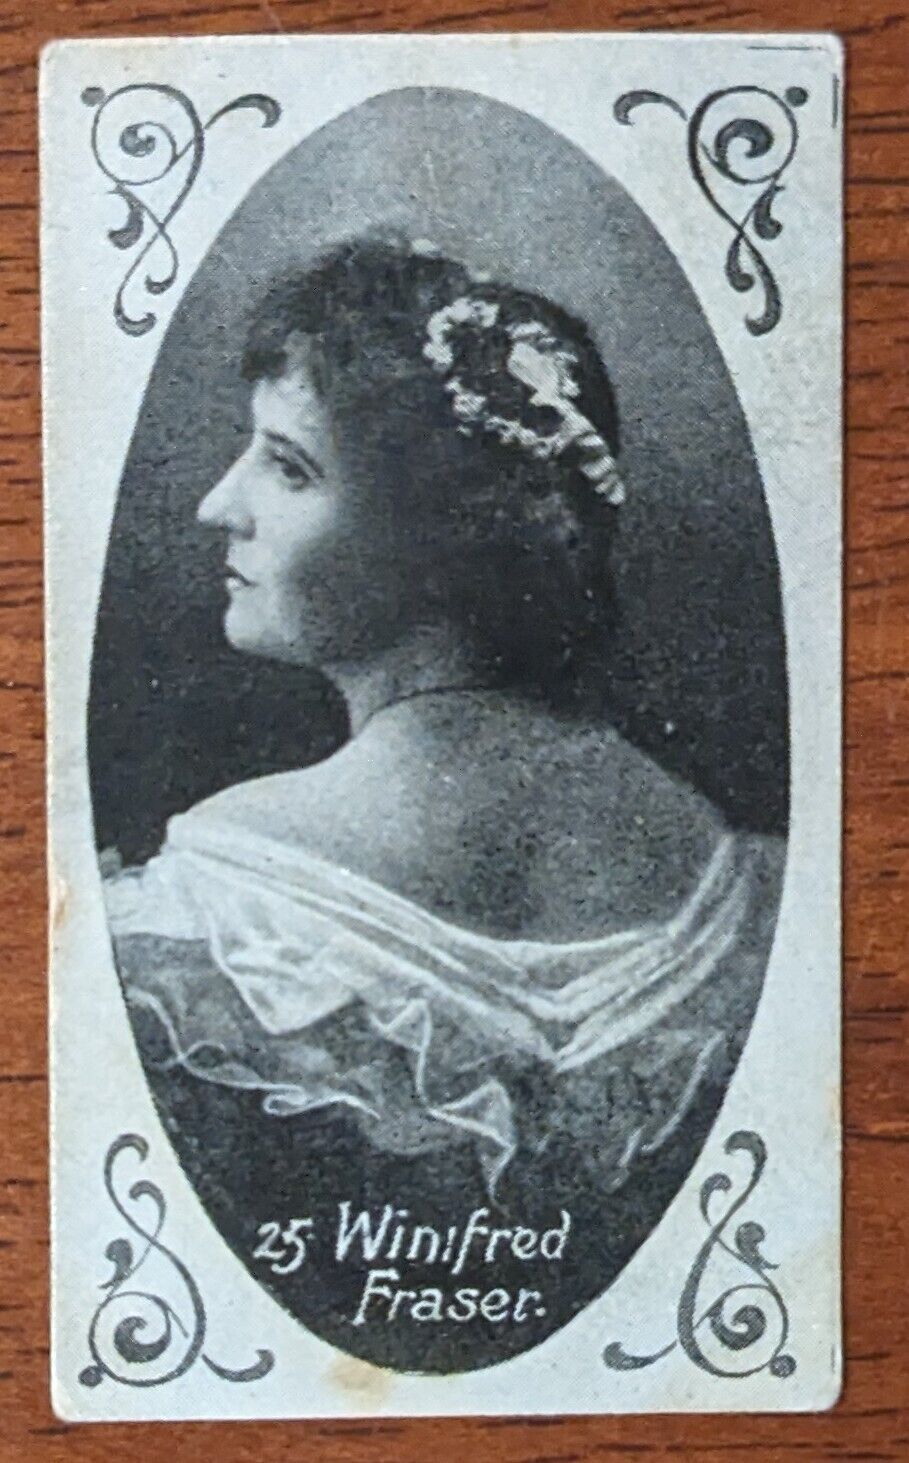  1904 Wills Vice Regal cigarette Card Music Hall celebrities #25 Winifred Fraser